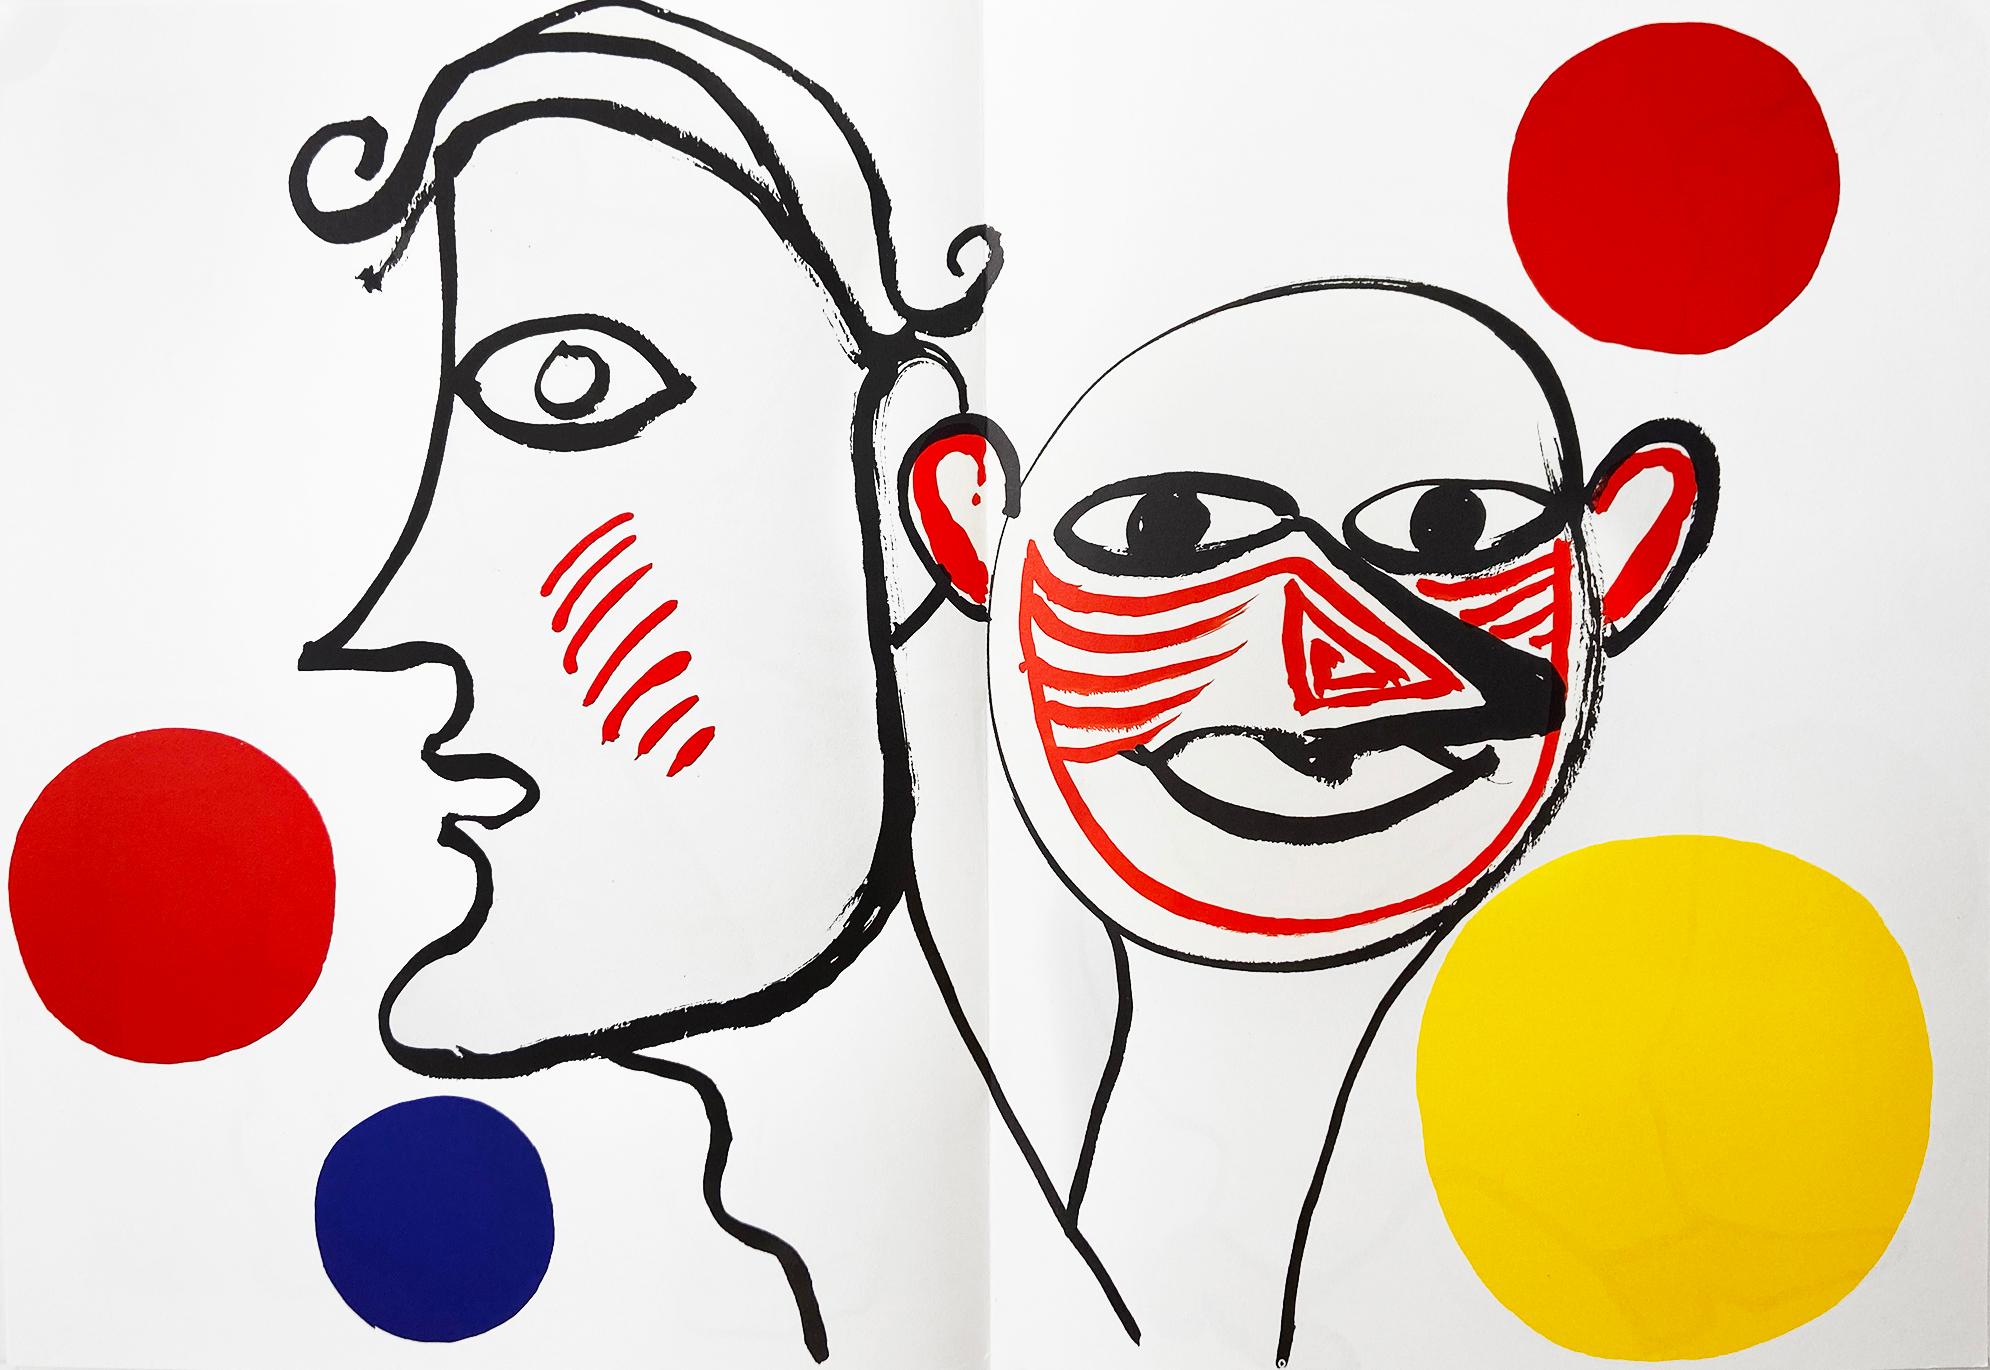 Alexander Calder Lithograph c. 1975 from Derrière le miroir:

Lithograph in colors; 15 x 22 inches. c.1975.
Some corner bending on both upper areas; in otherwise good overall vintage condition with bright colors; contains center fold-line as